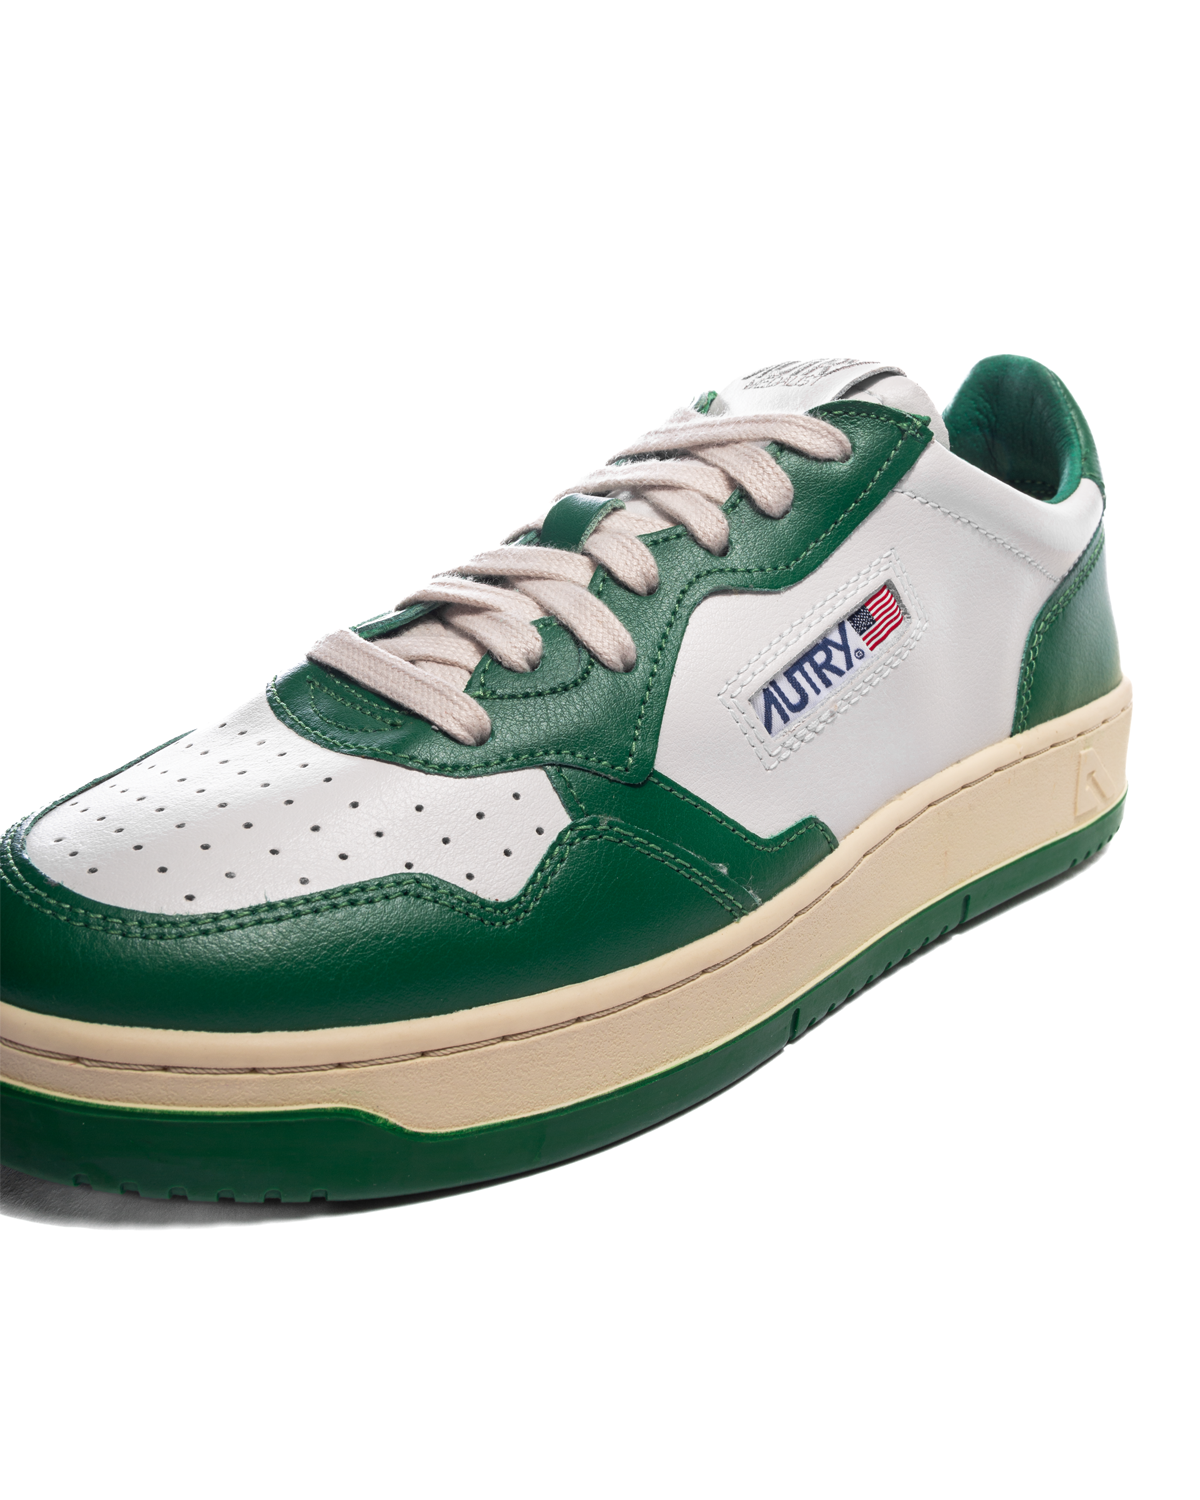 Medalist Low Leather/Leather White/Green